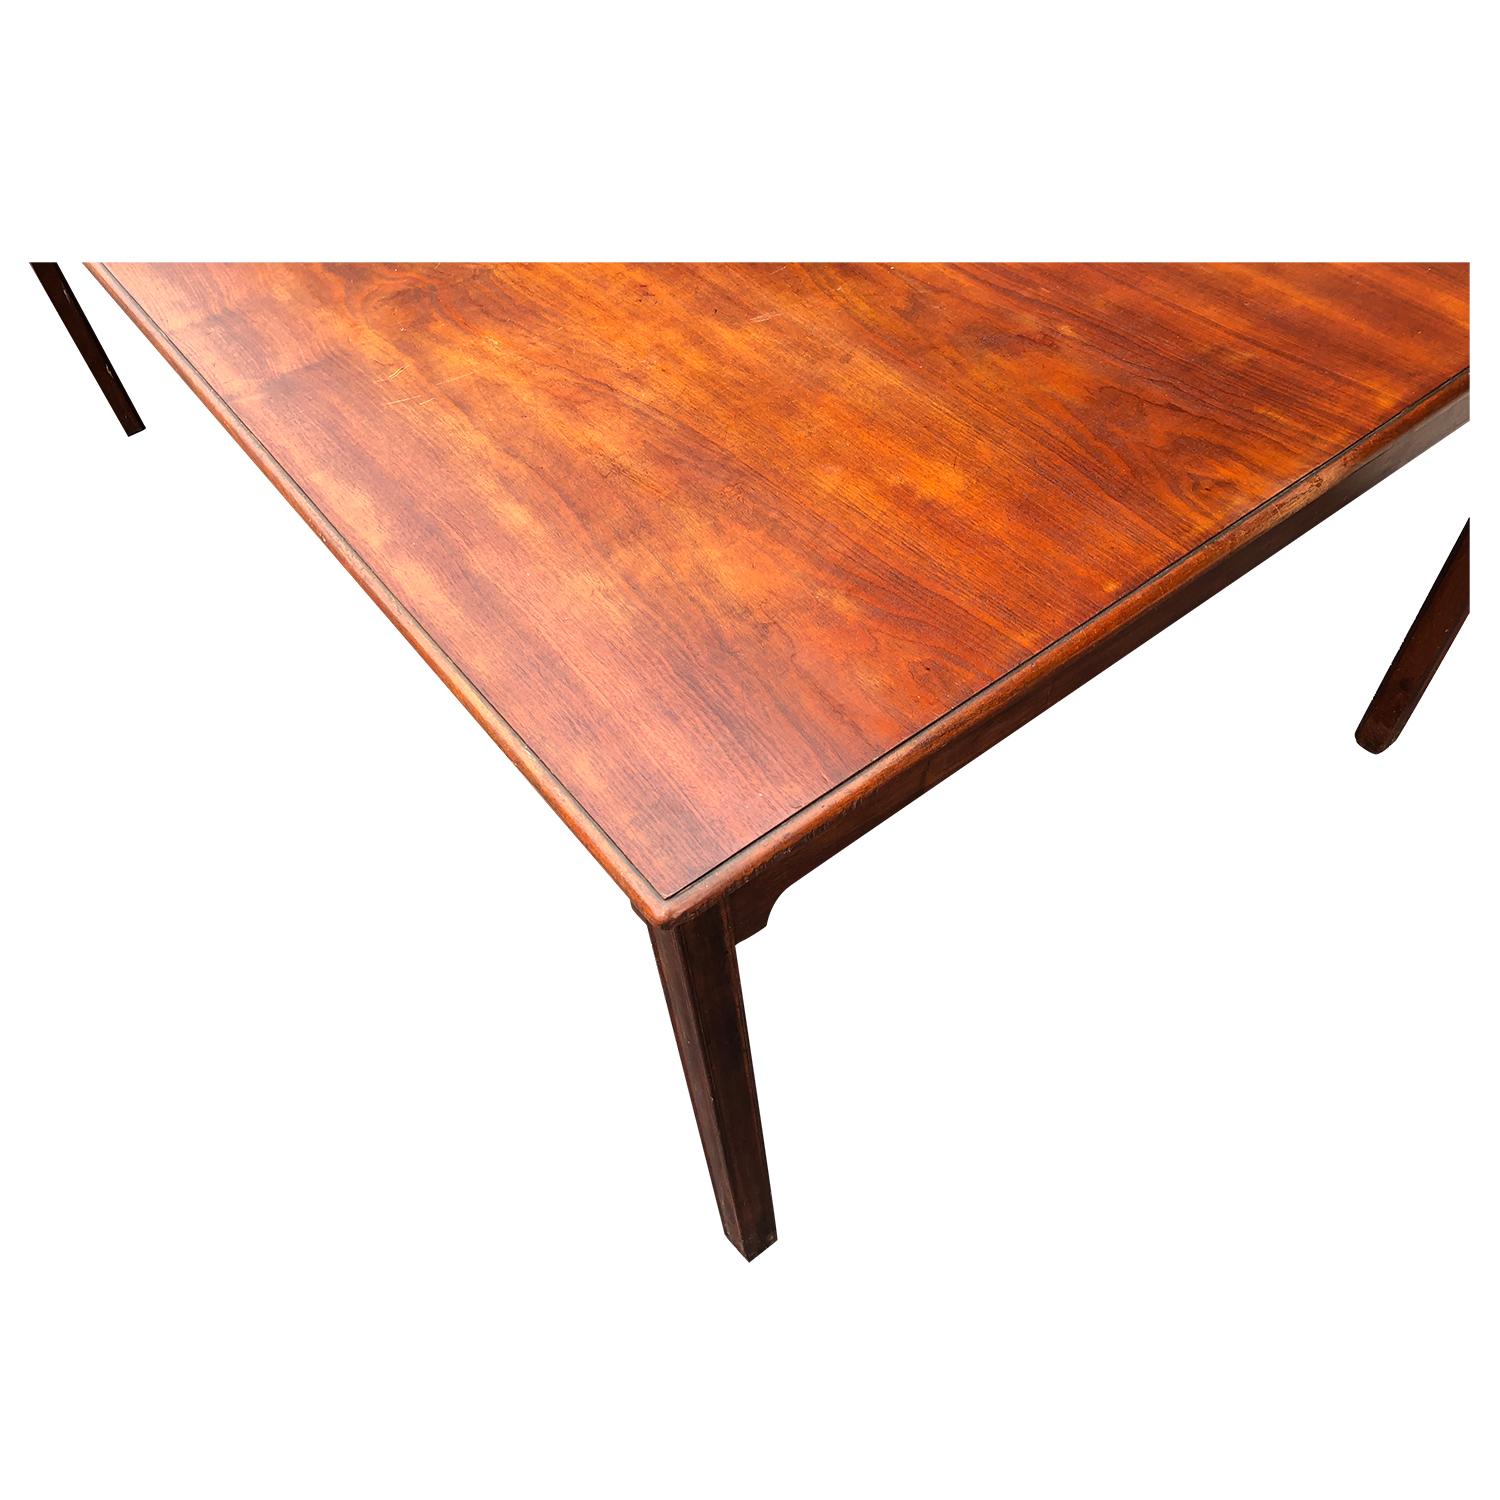 Hand-Carved 20th Century Danish Modern Vintage Cuban Mahogany Dining Table by Kaare Klint For Sale